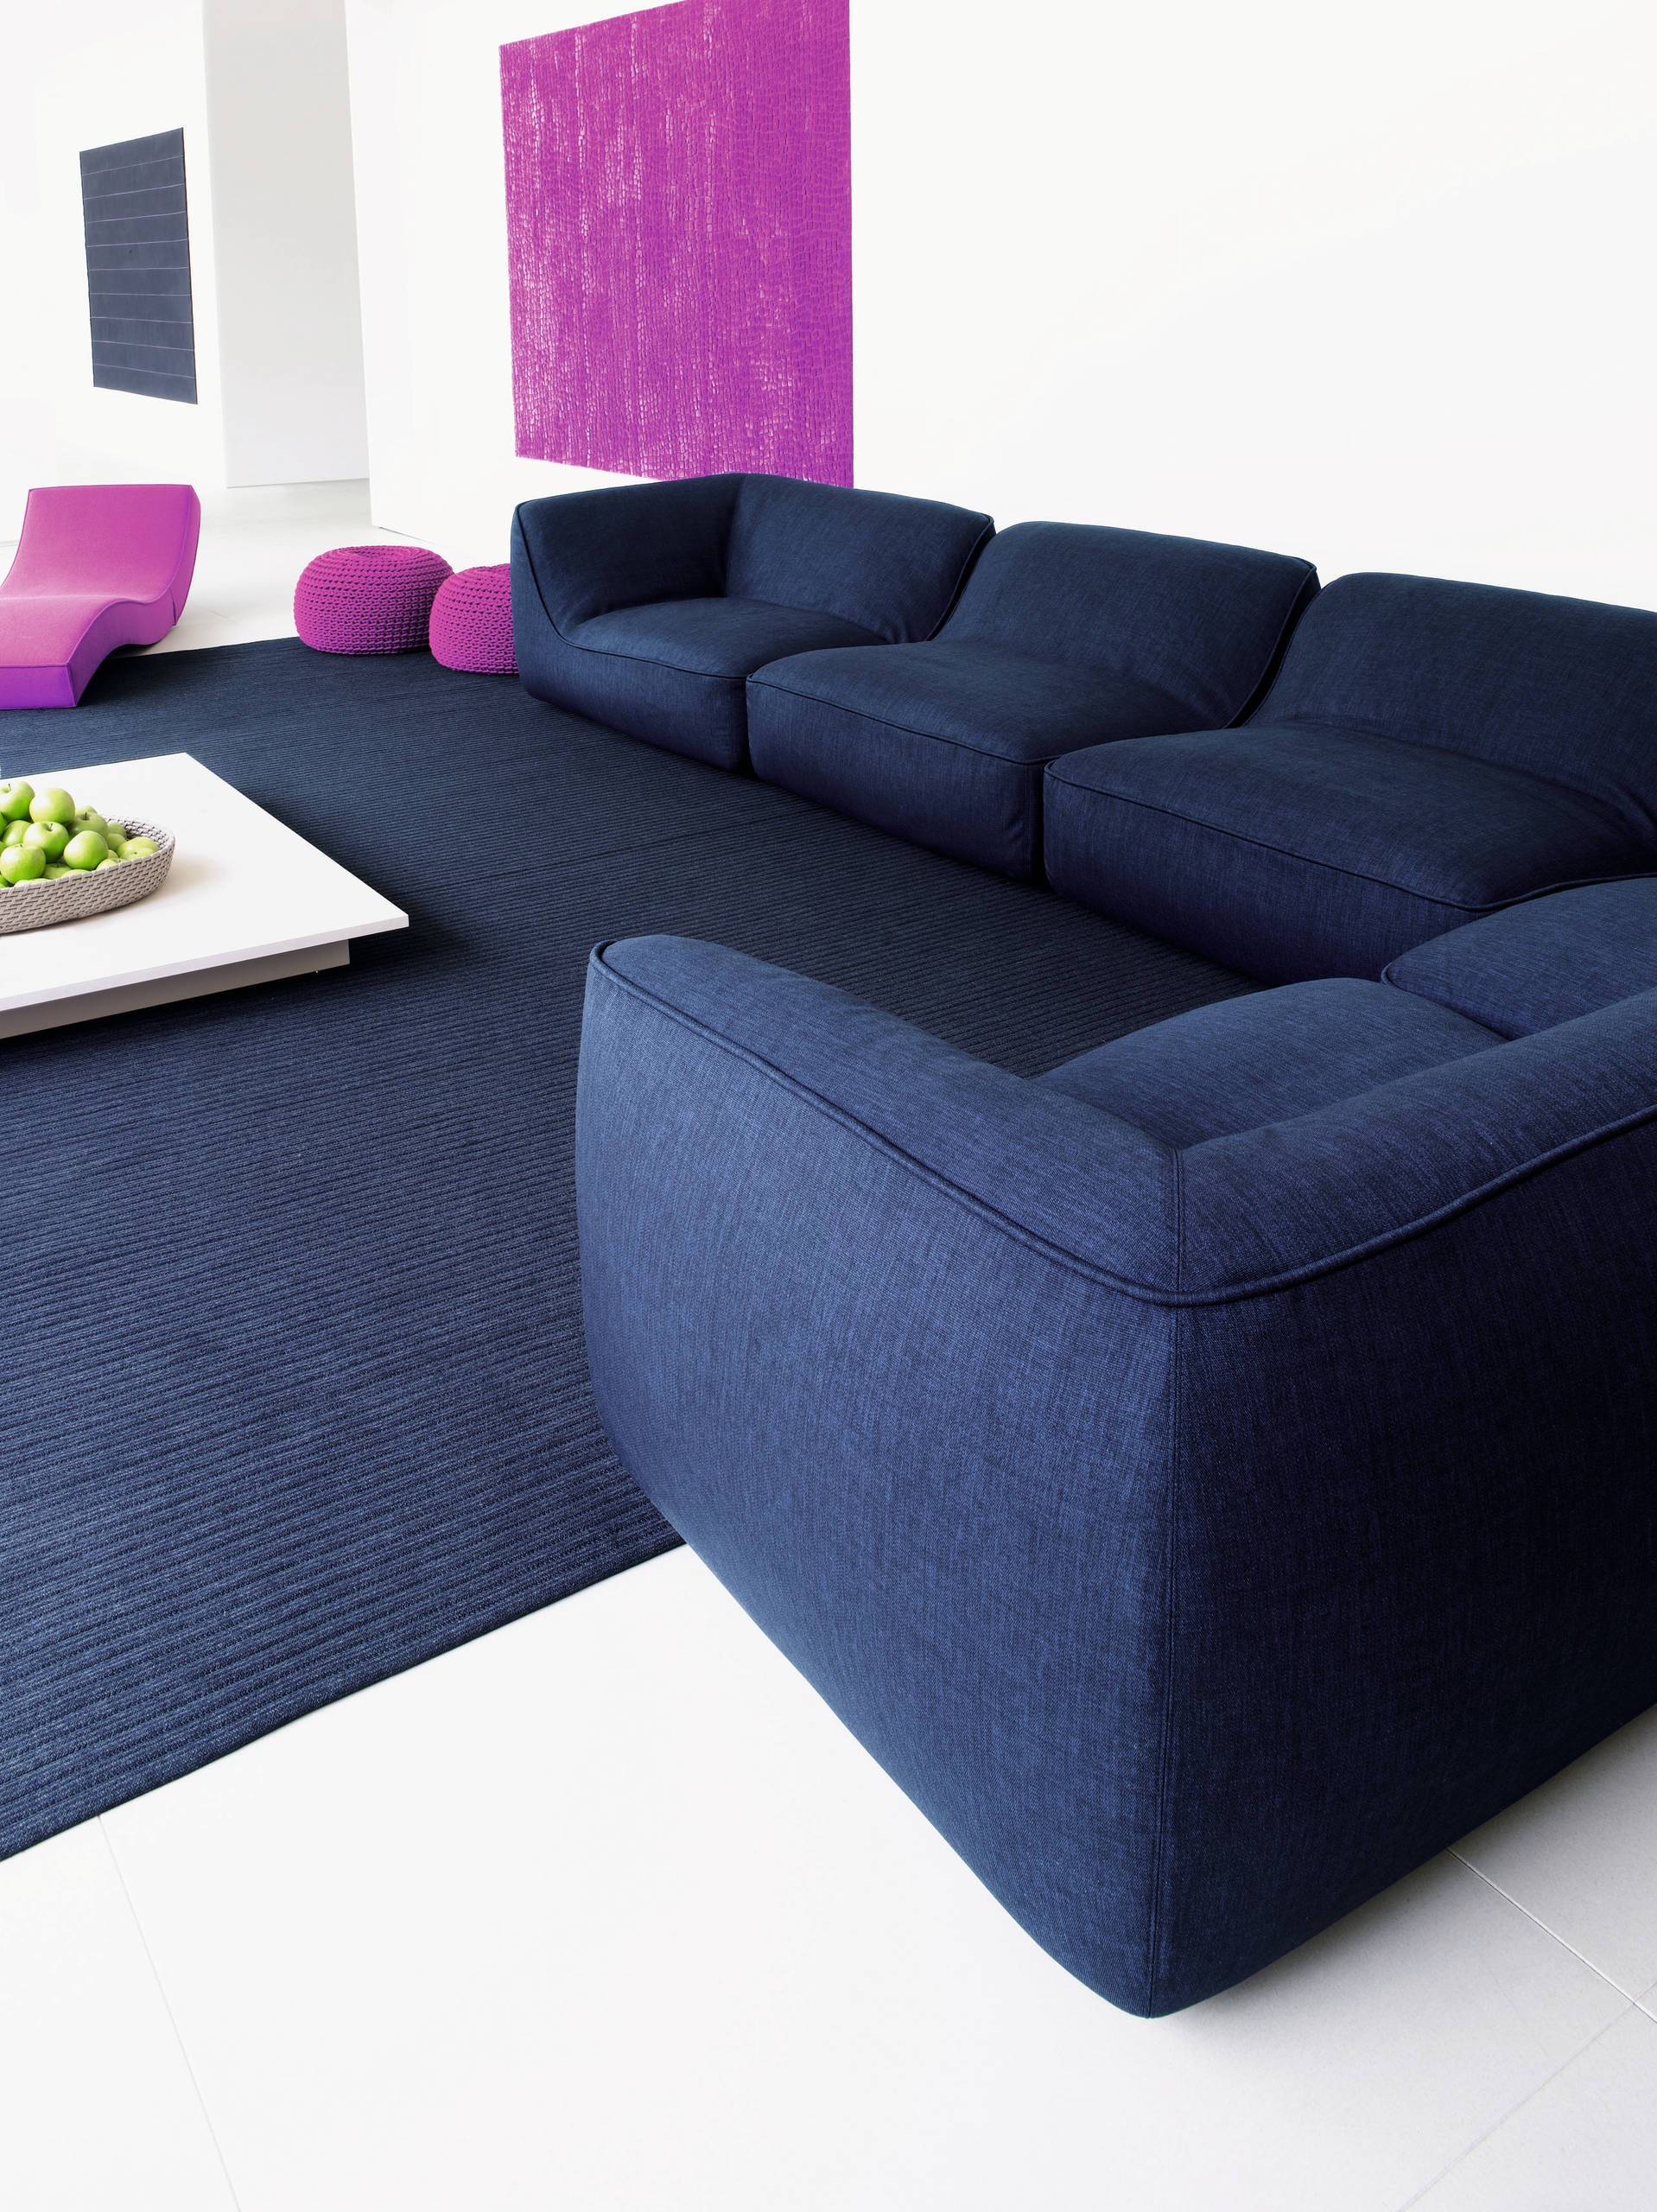 Home sectional sofas 11 cool navy blue sectional sofa digital